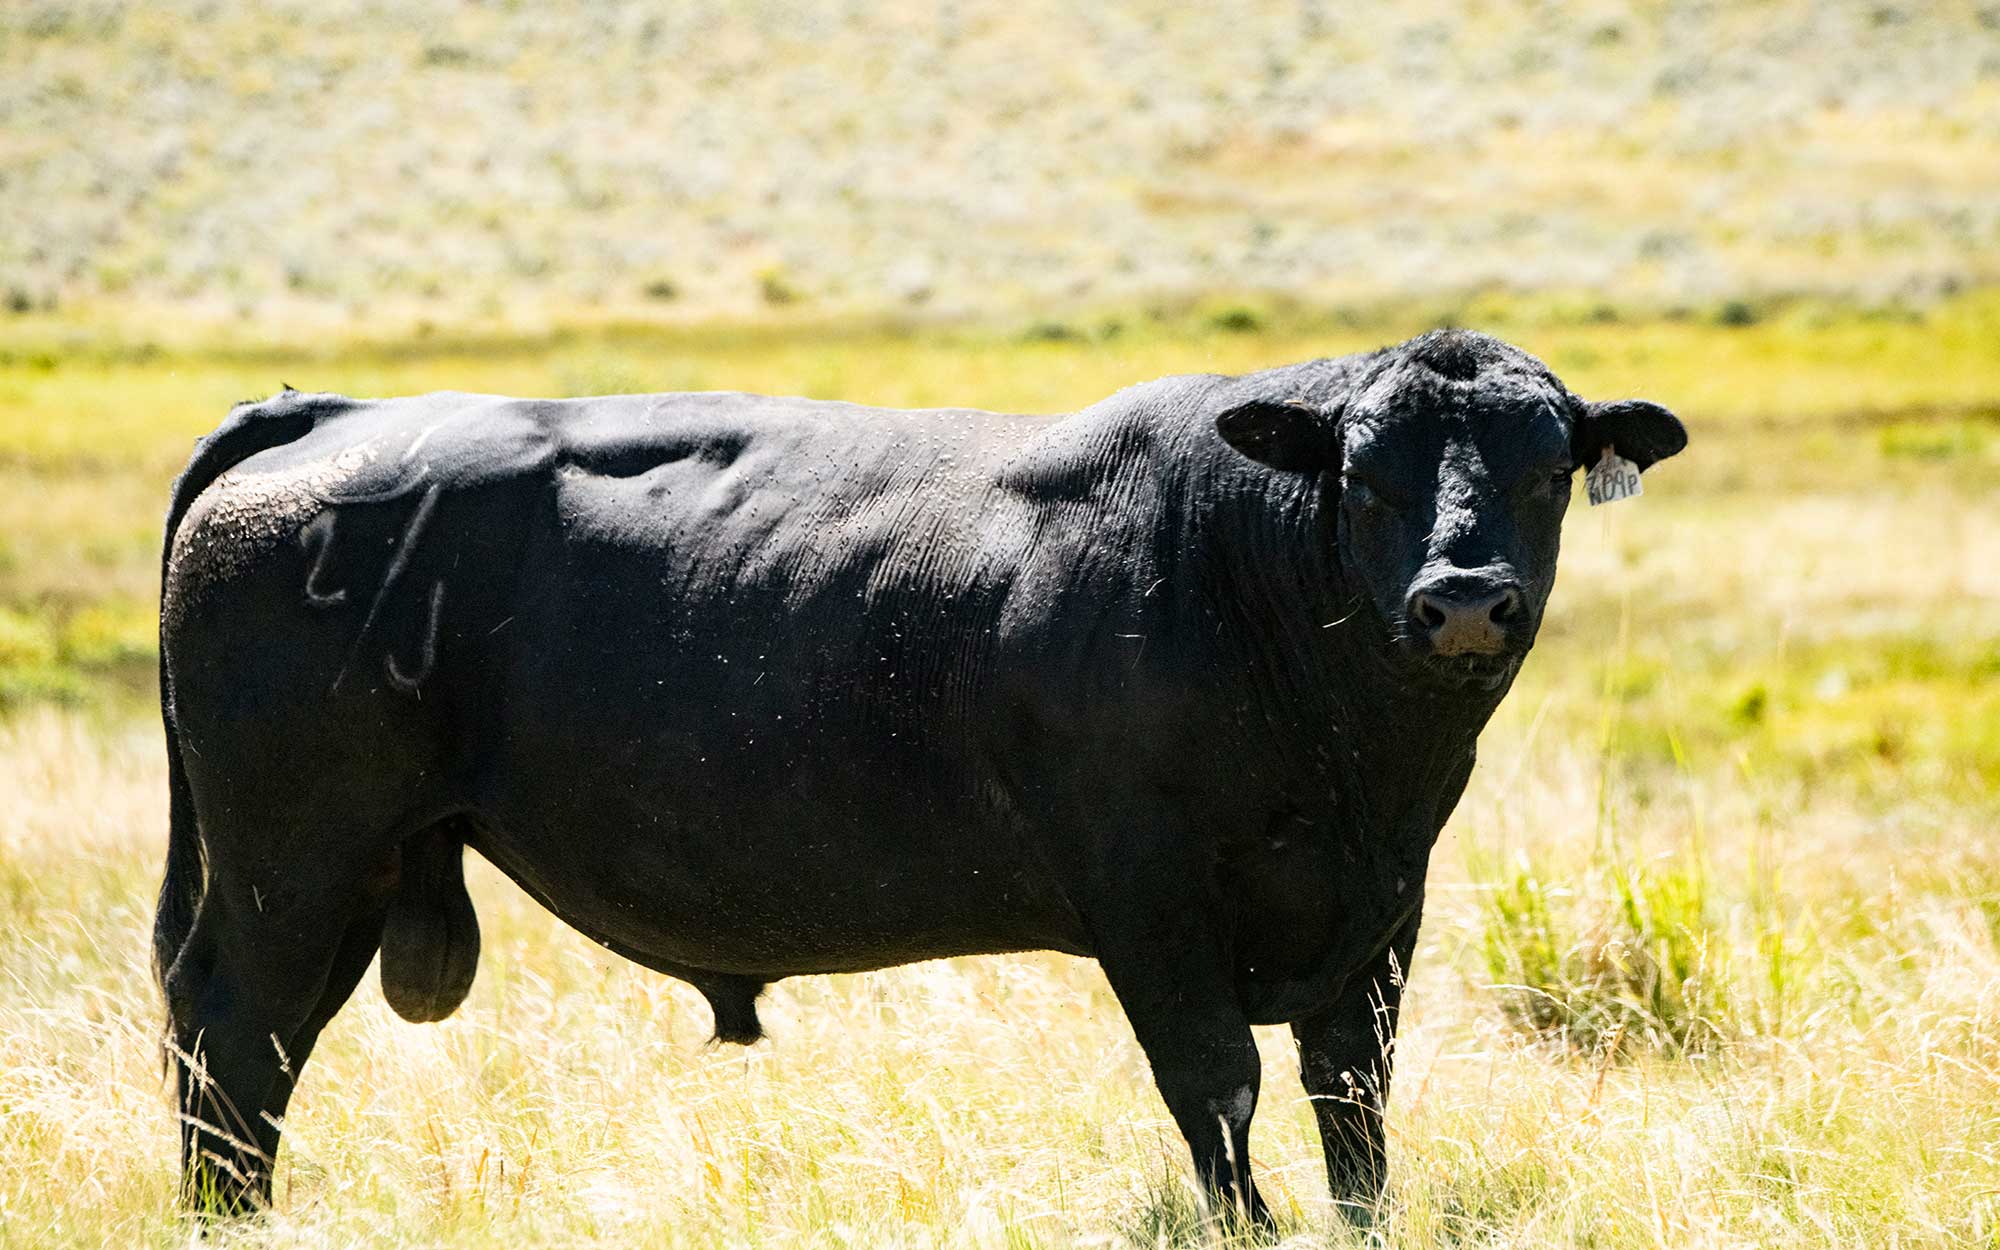 A black angus bull standing in a hilly pasture.